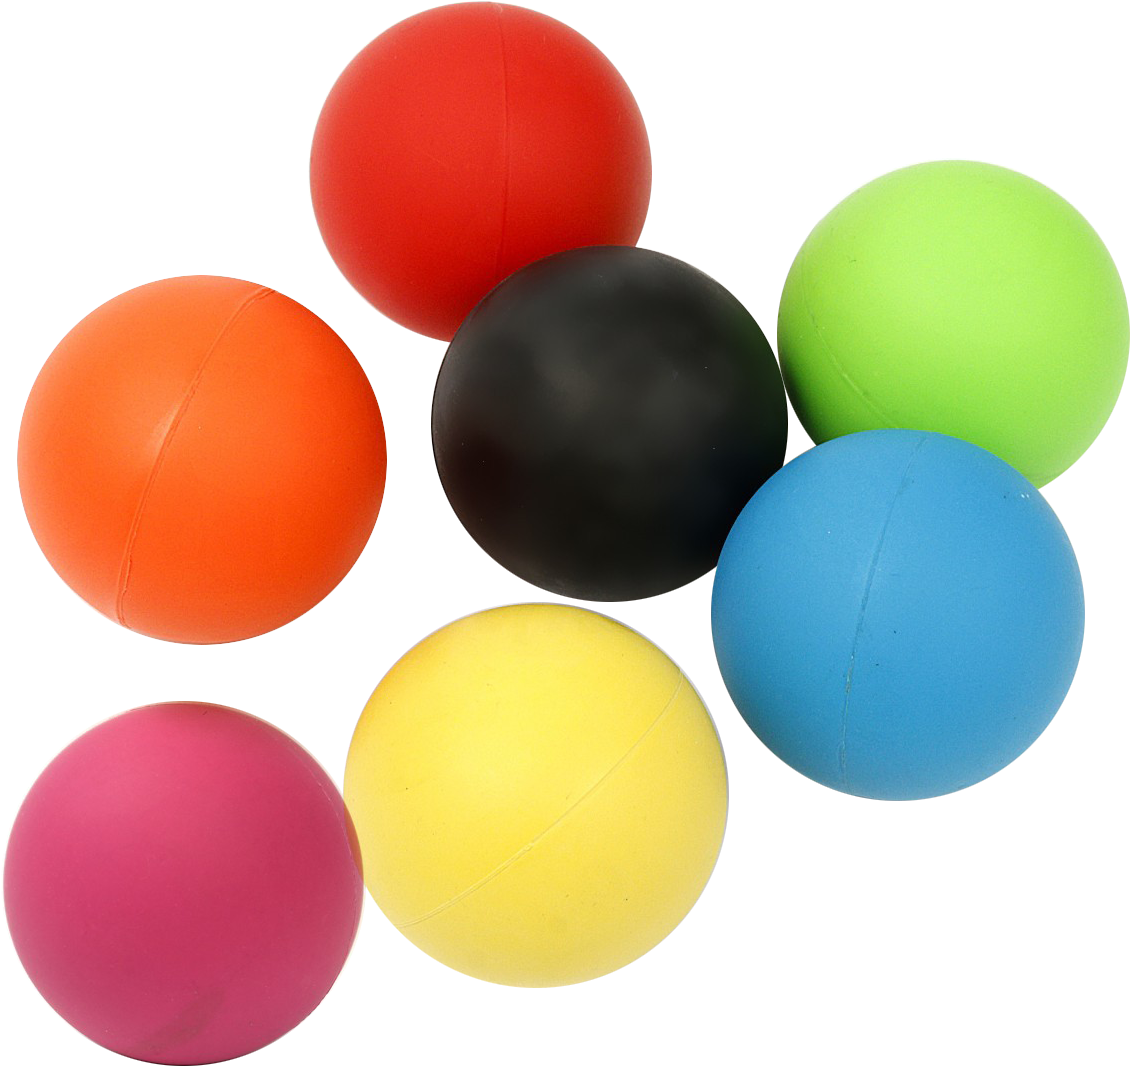 Lacrosse Ball Background PNG Image